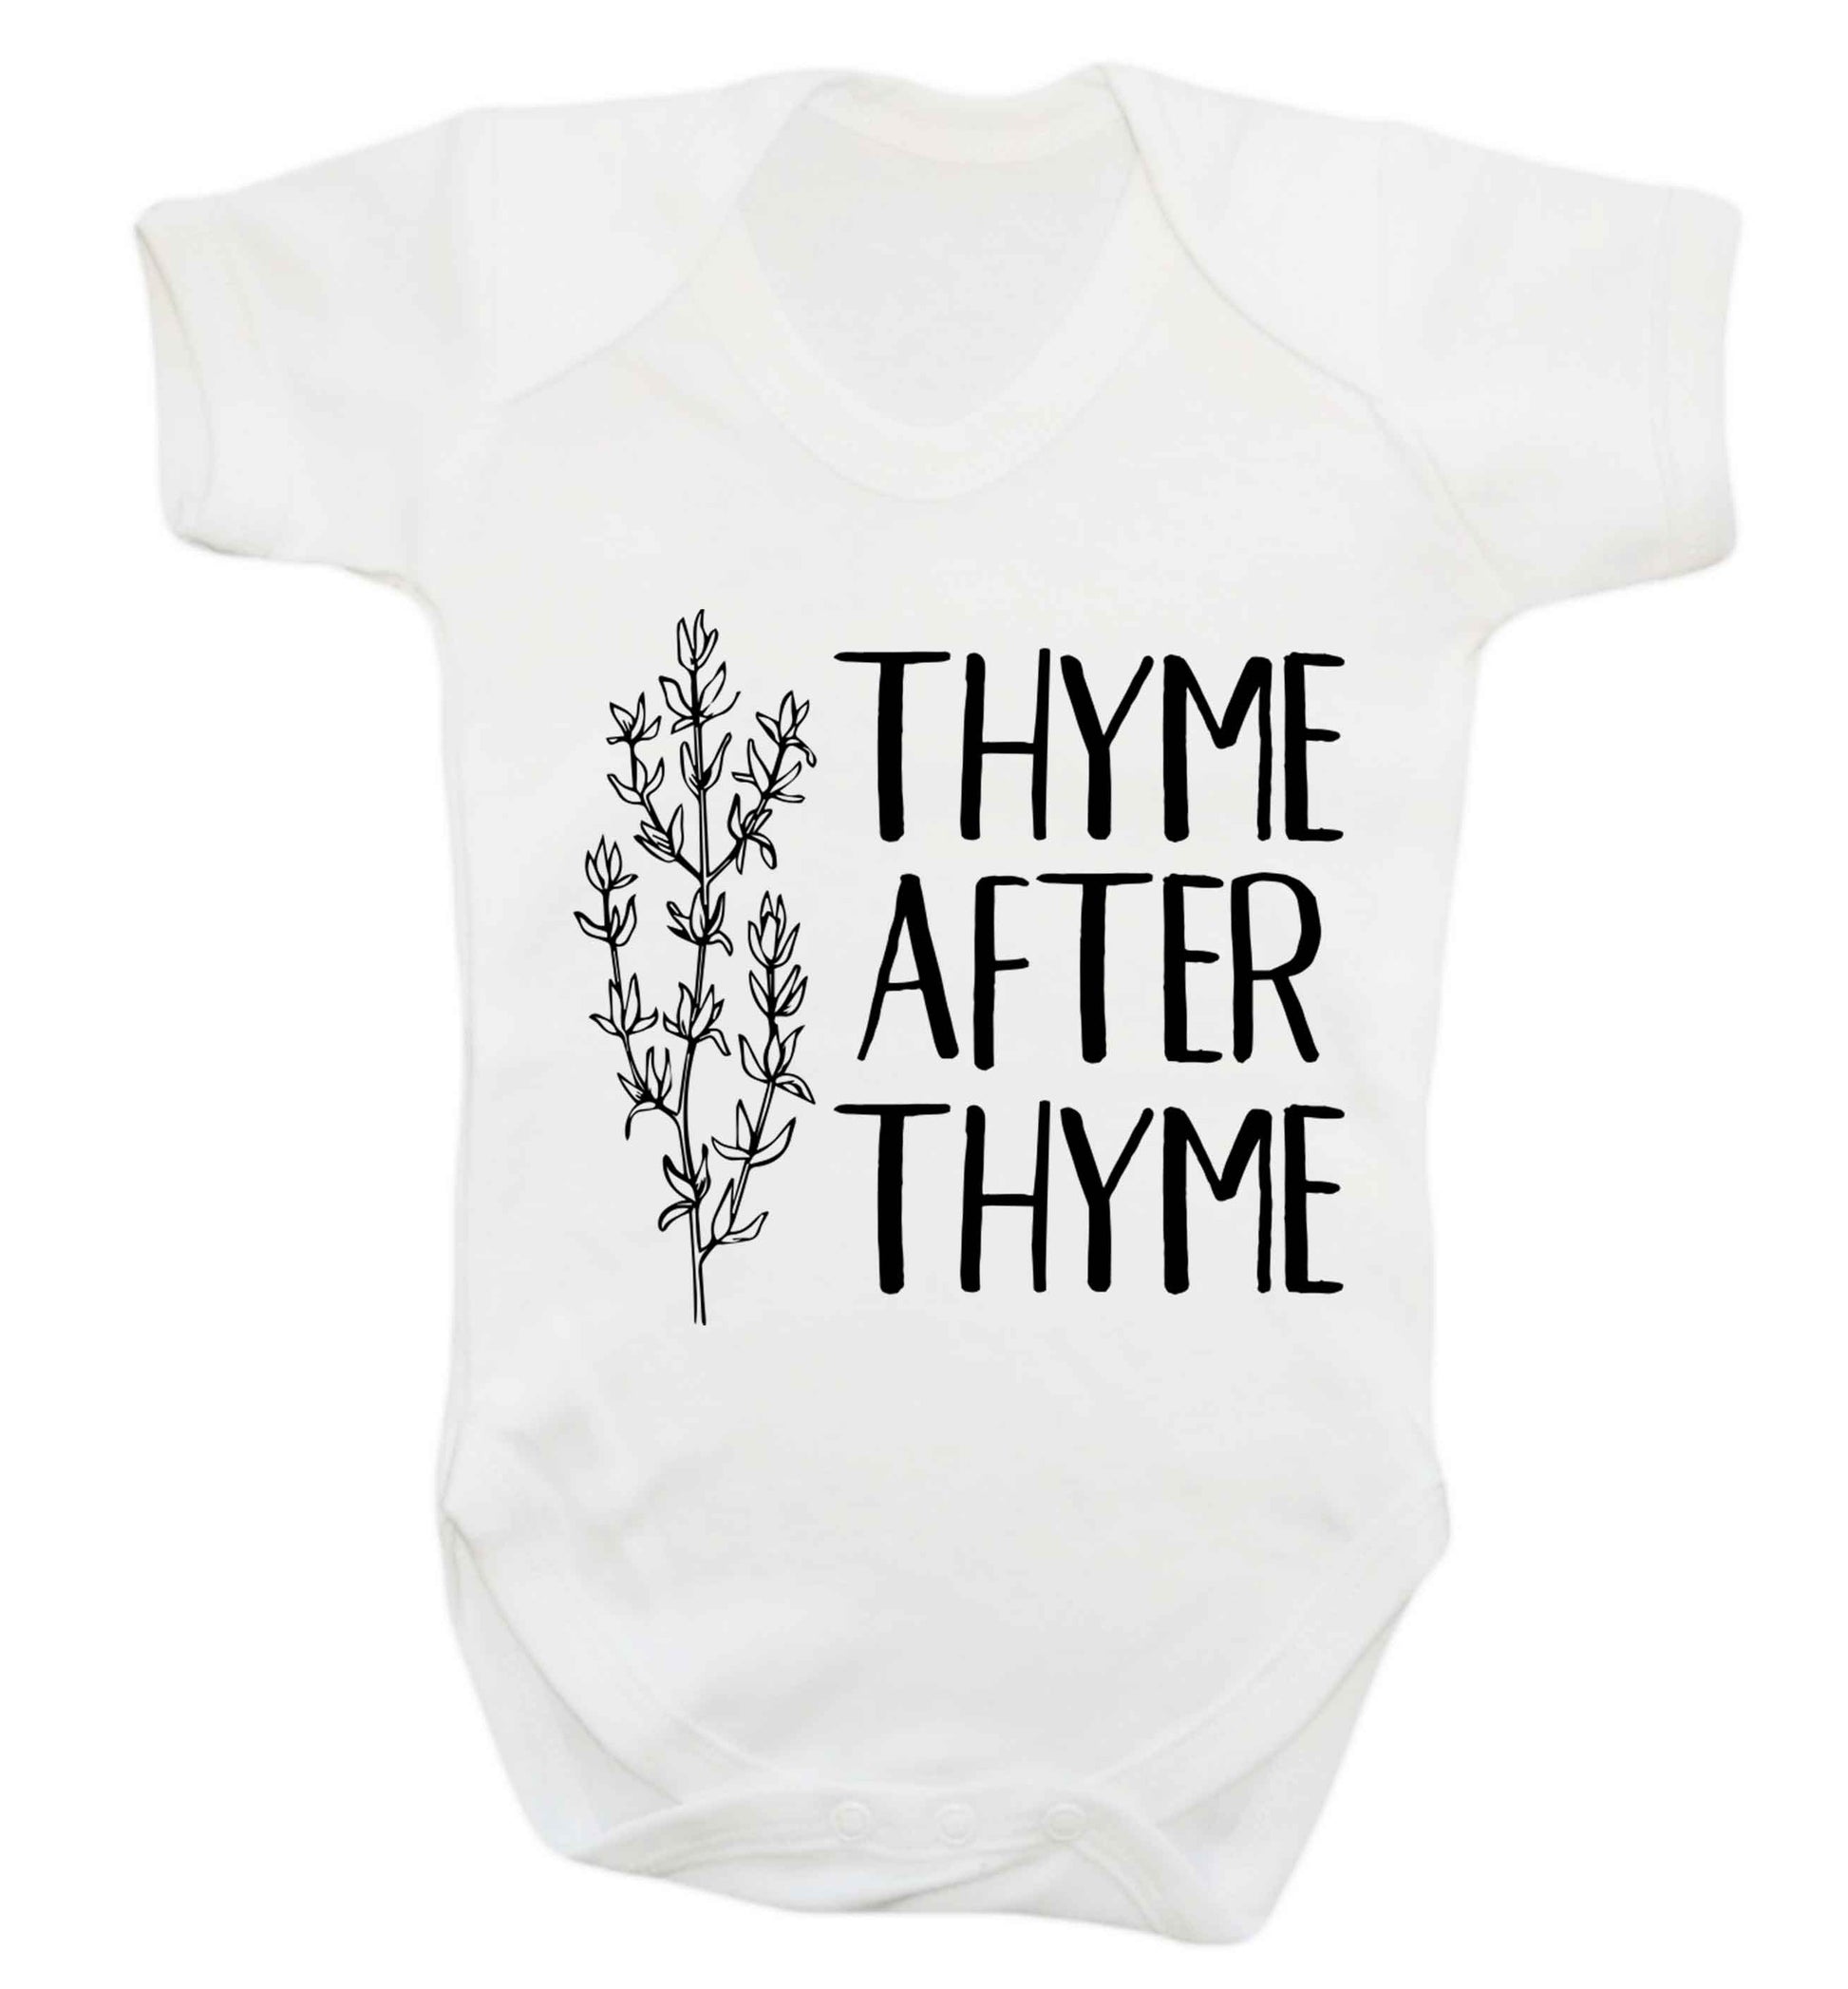 Thyme after thyme Baby Vest white 18-24 months